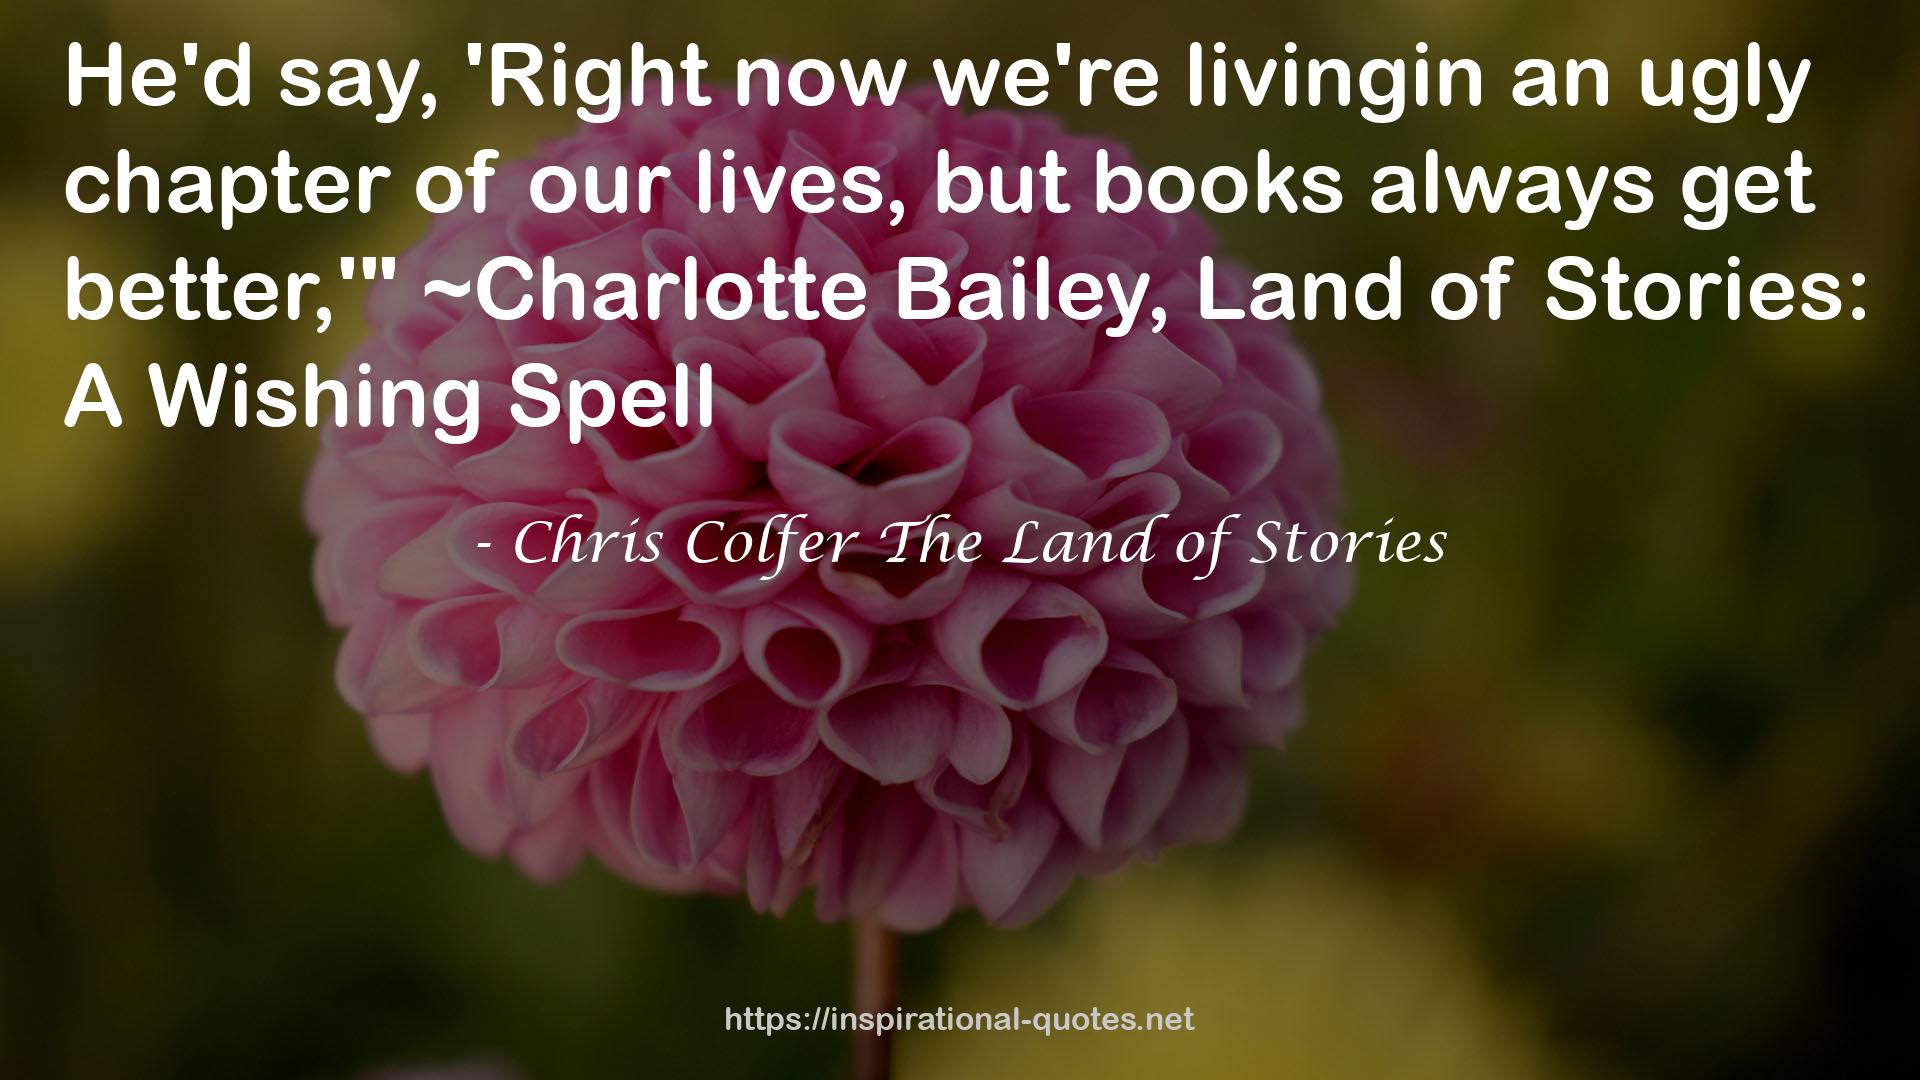 Chris Colfer The Land of Stories QUOTES